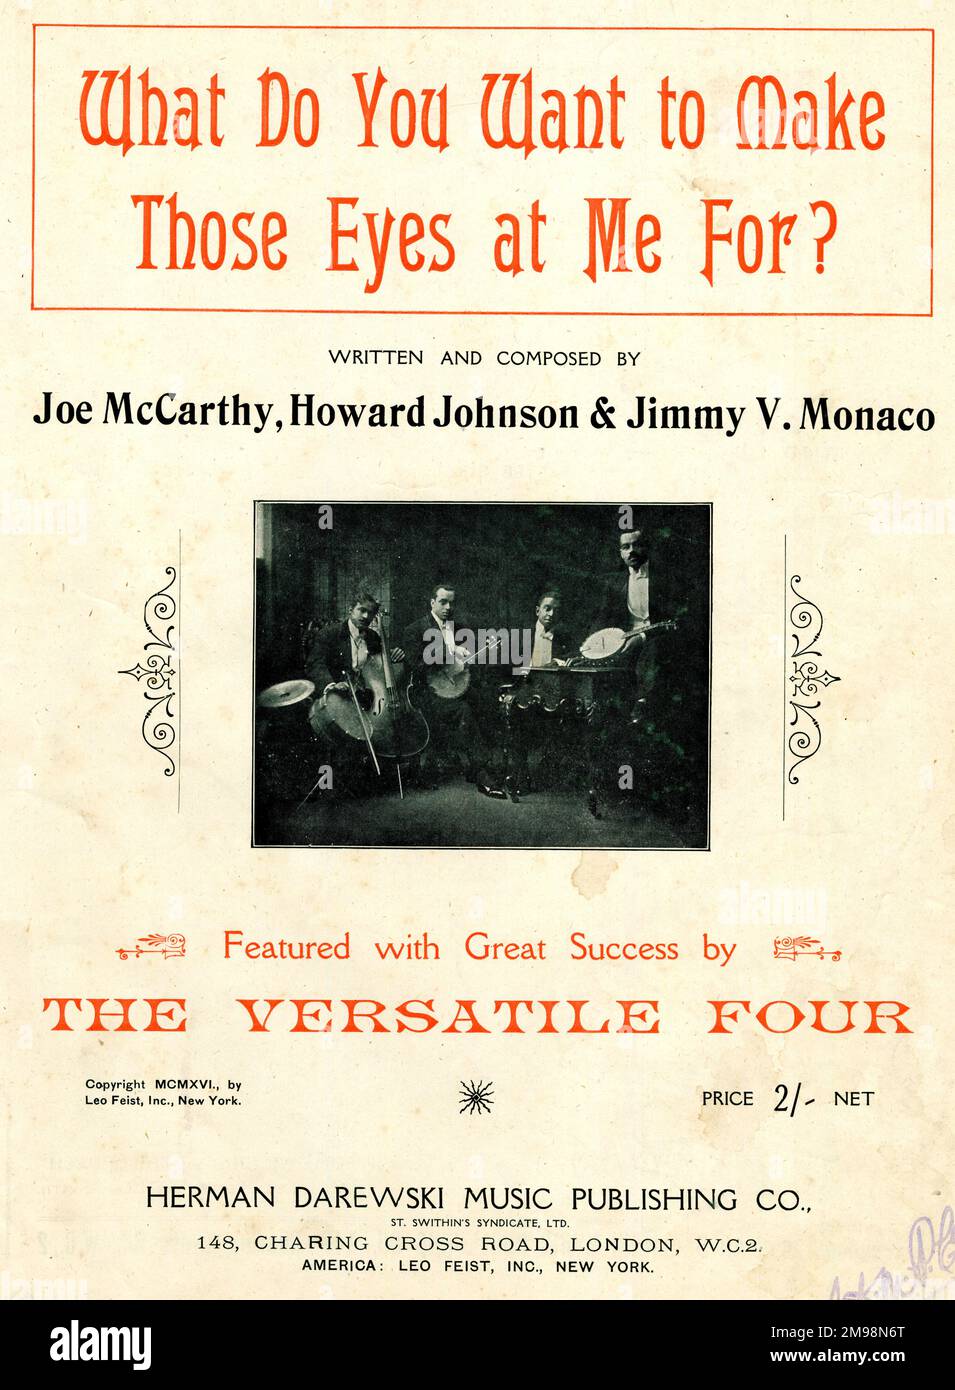 Music cover, What Do You Want to Make Those Eyes at Me For? written and composed by Joe McCarthy, Howard Johnson and Jimmy V Monaco, featured by The Versatile Four. Stock Photo